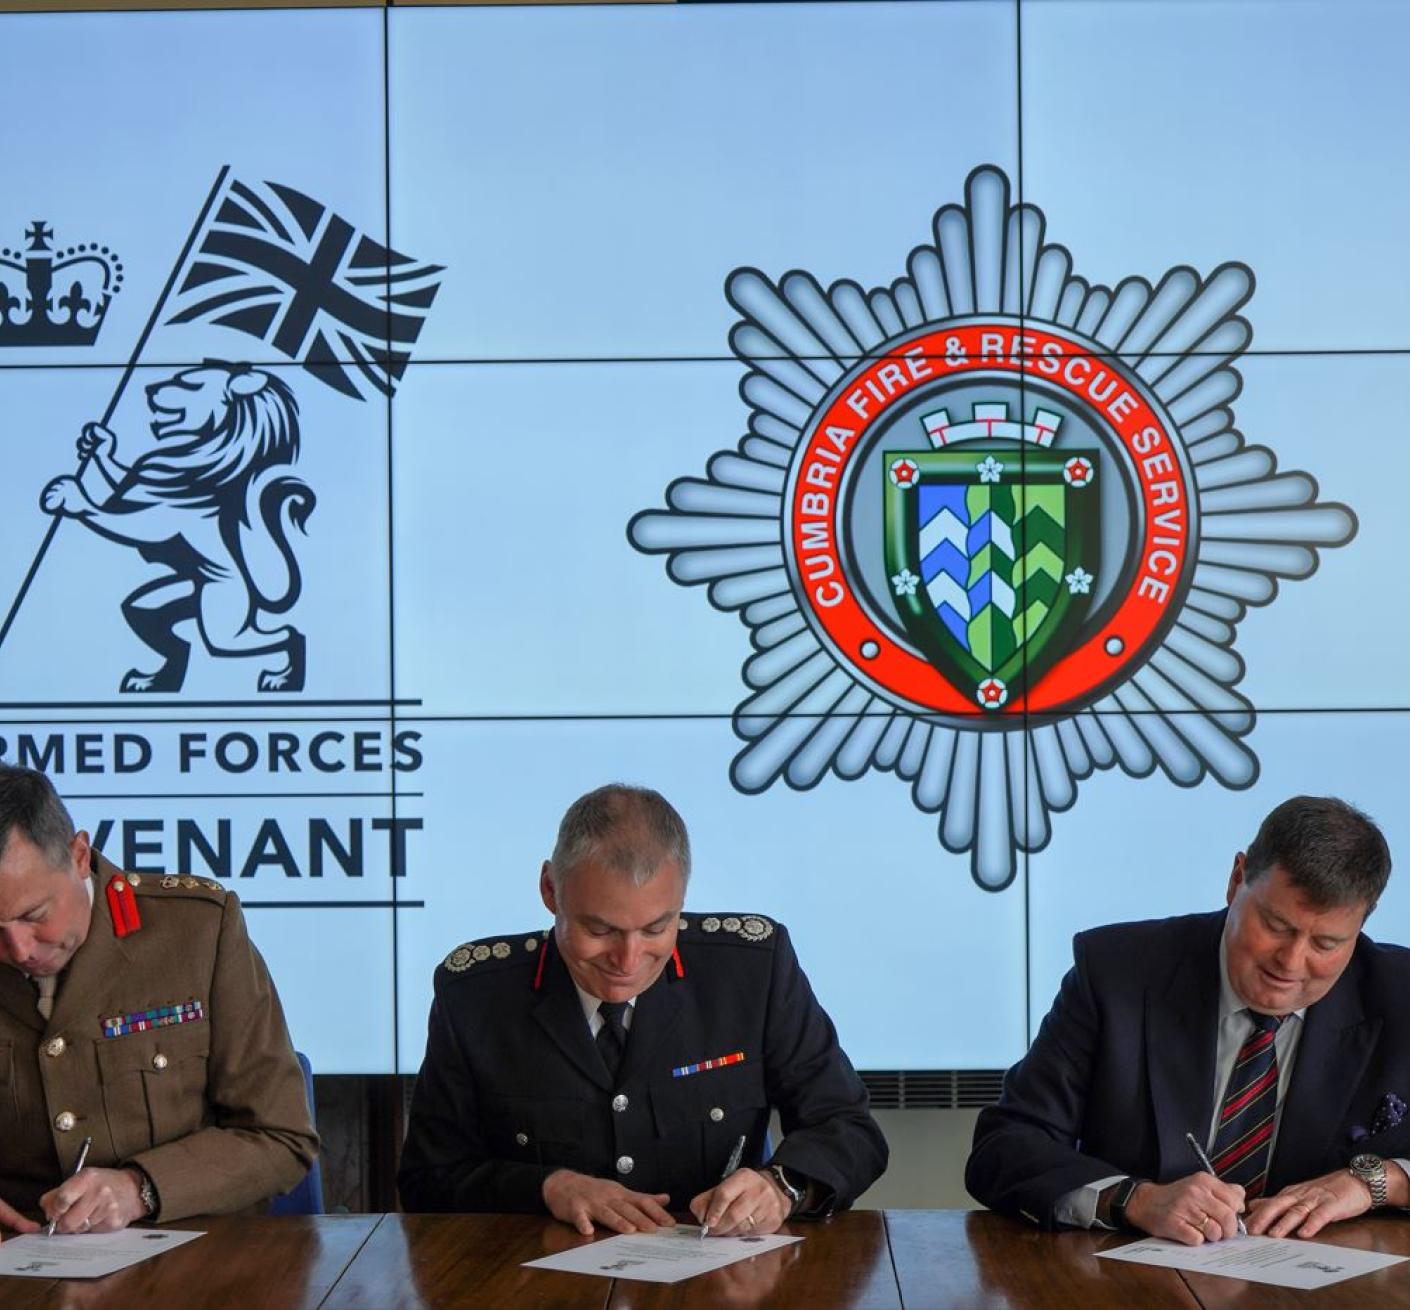 Armed Forces Covenant signing - Col Darren Doherty, Chief Fire Officer John Beard and Cumbria PFCC Peter McCall